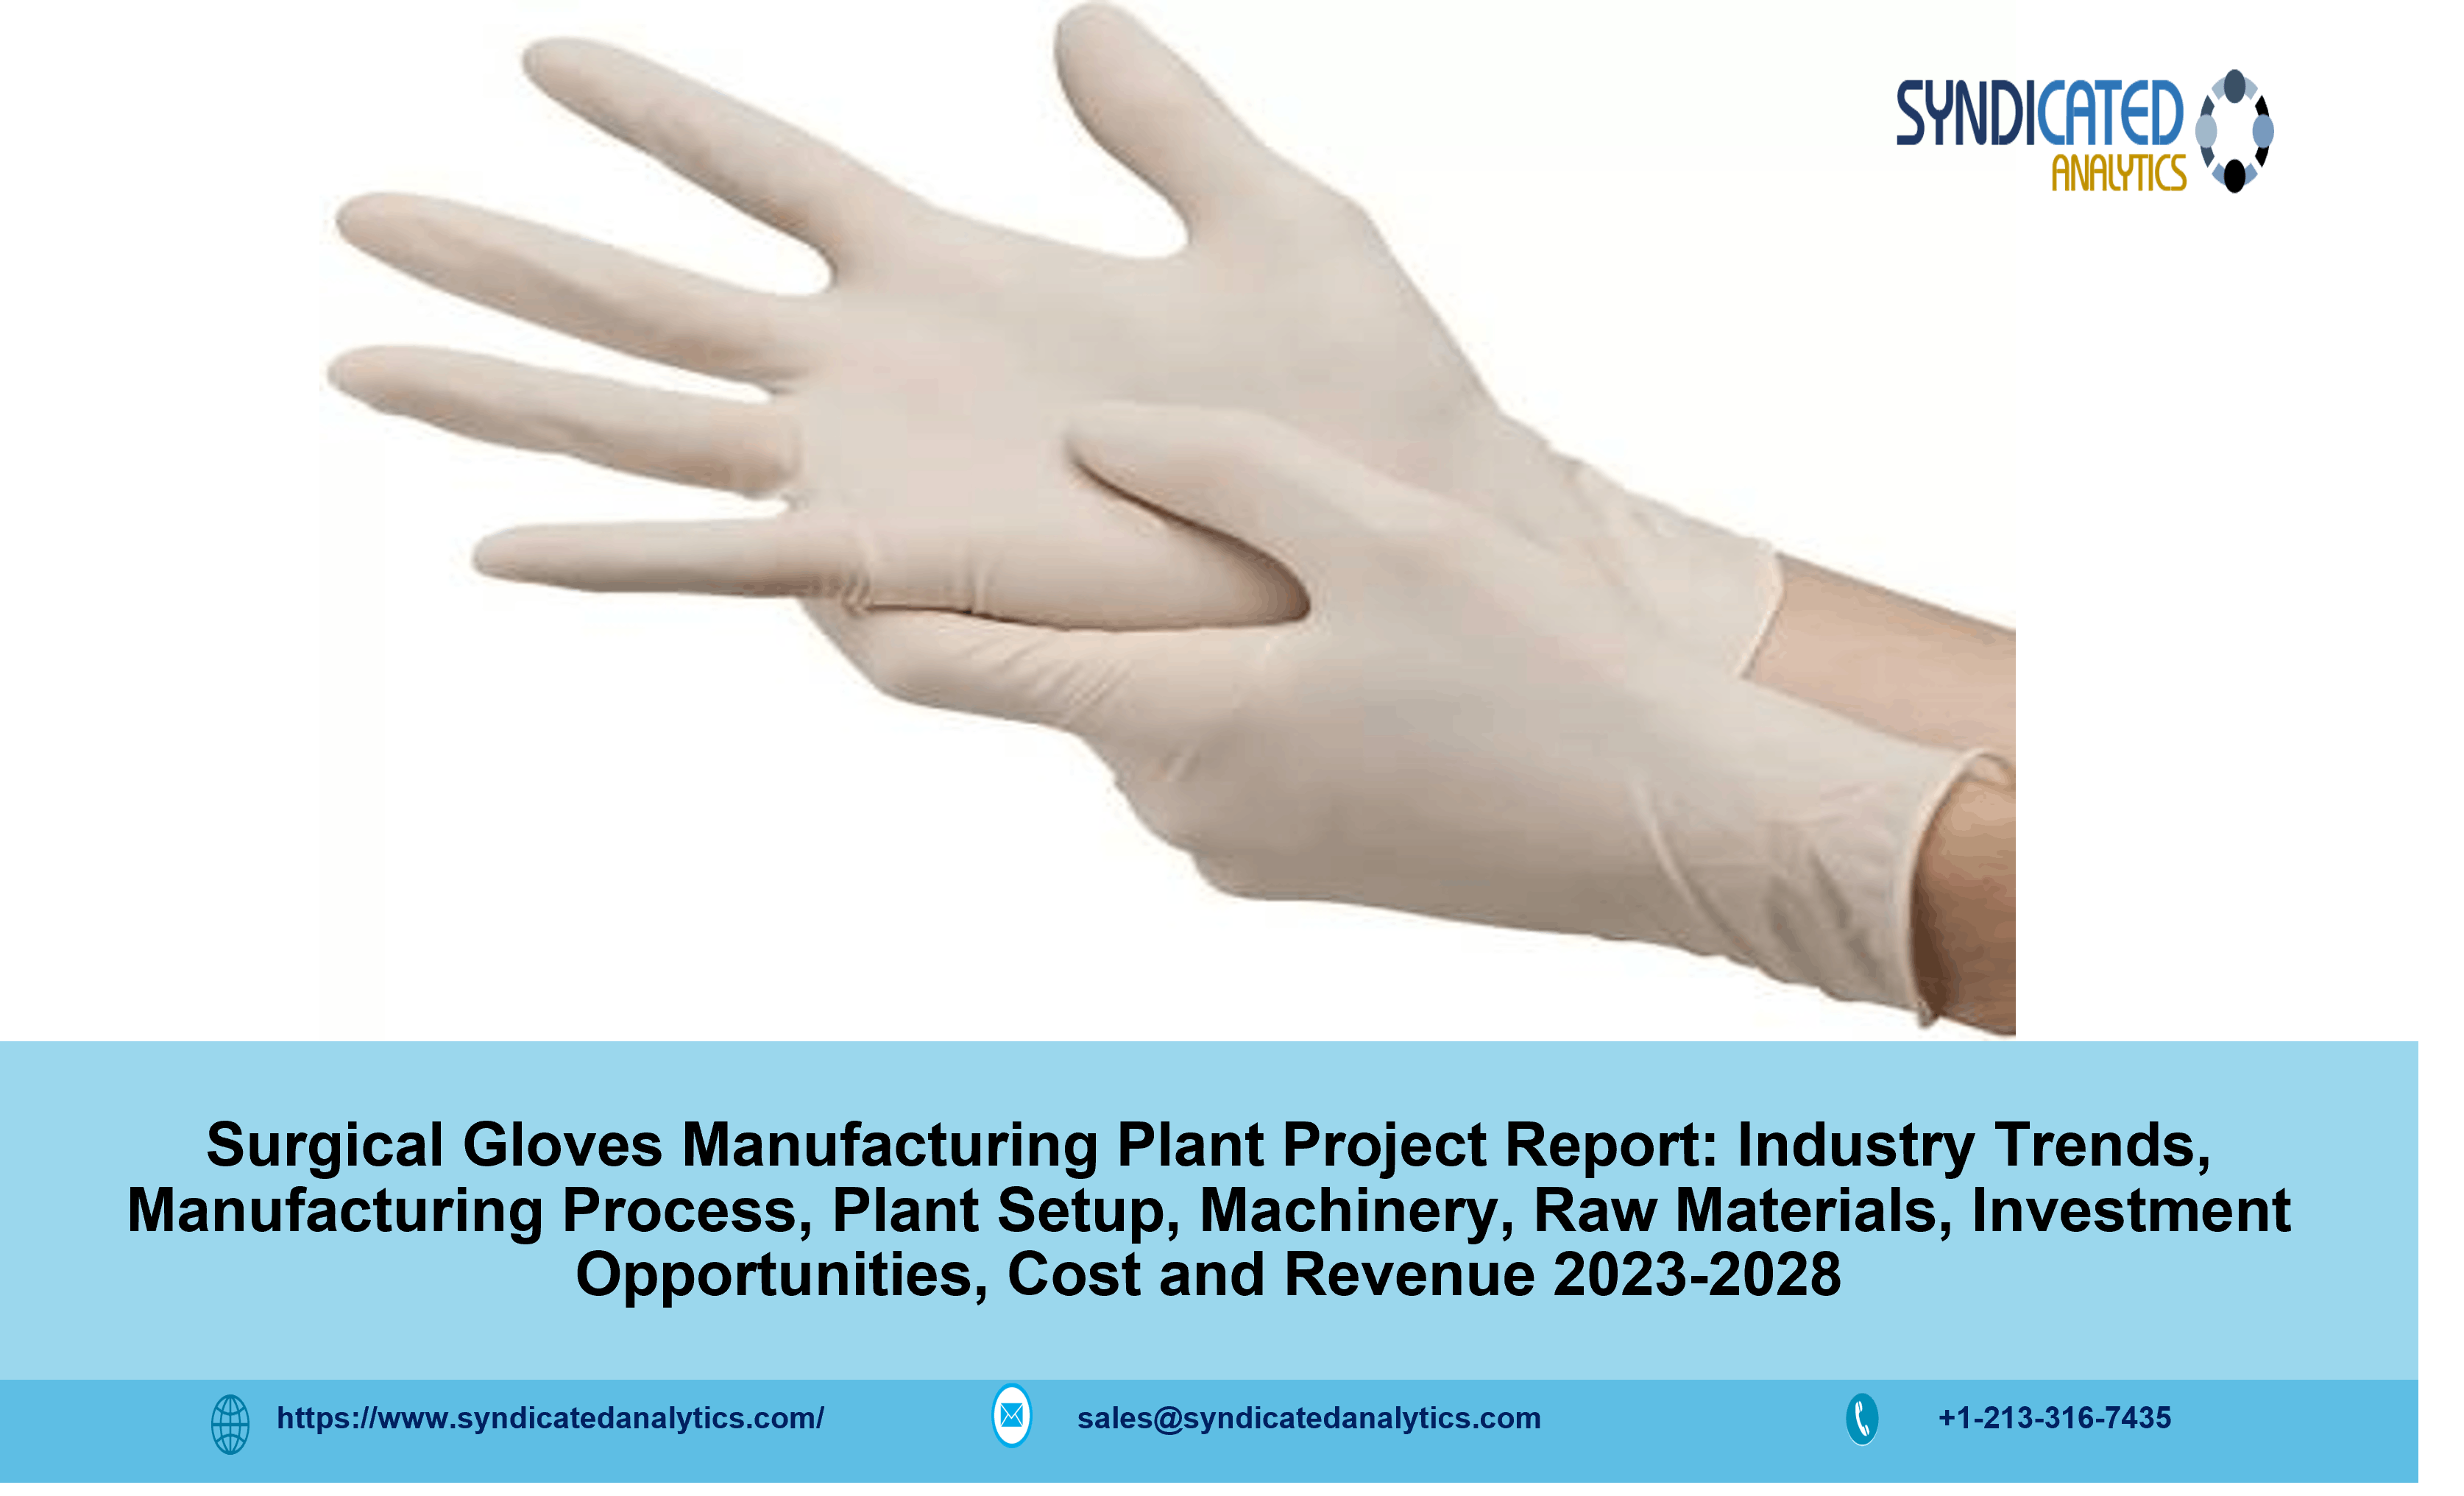 Surgical Gloves Manufacturing Plant Project Report.png